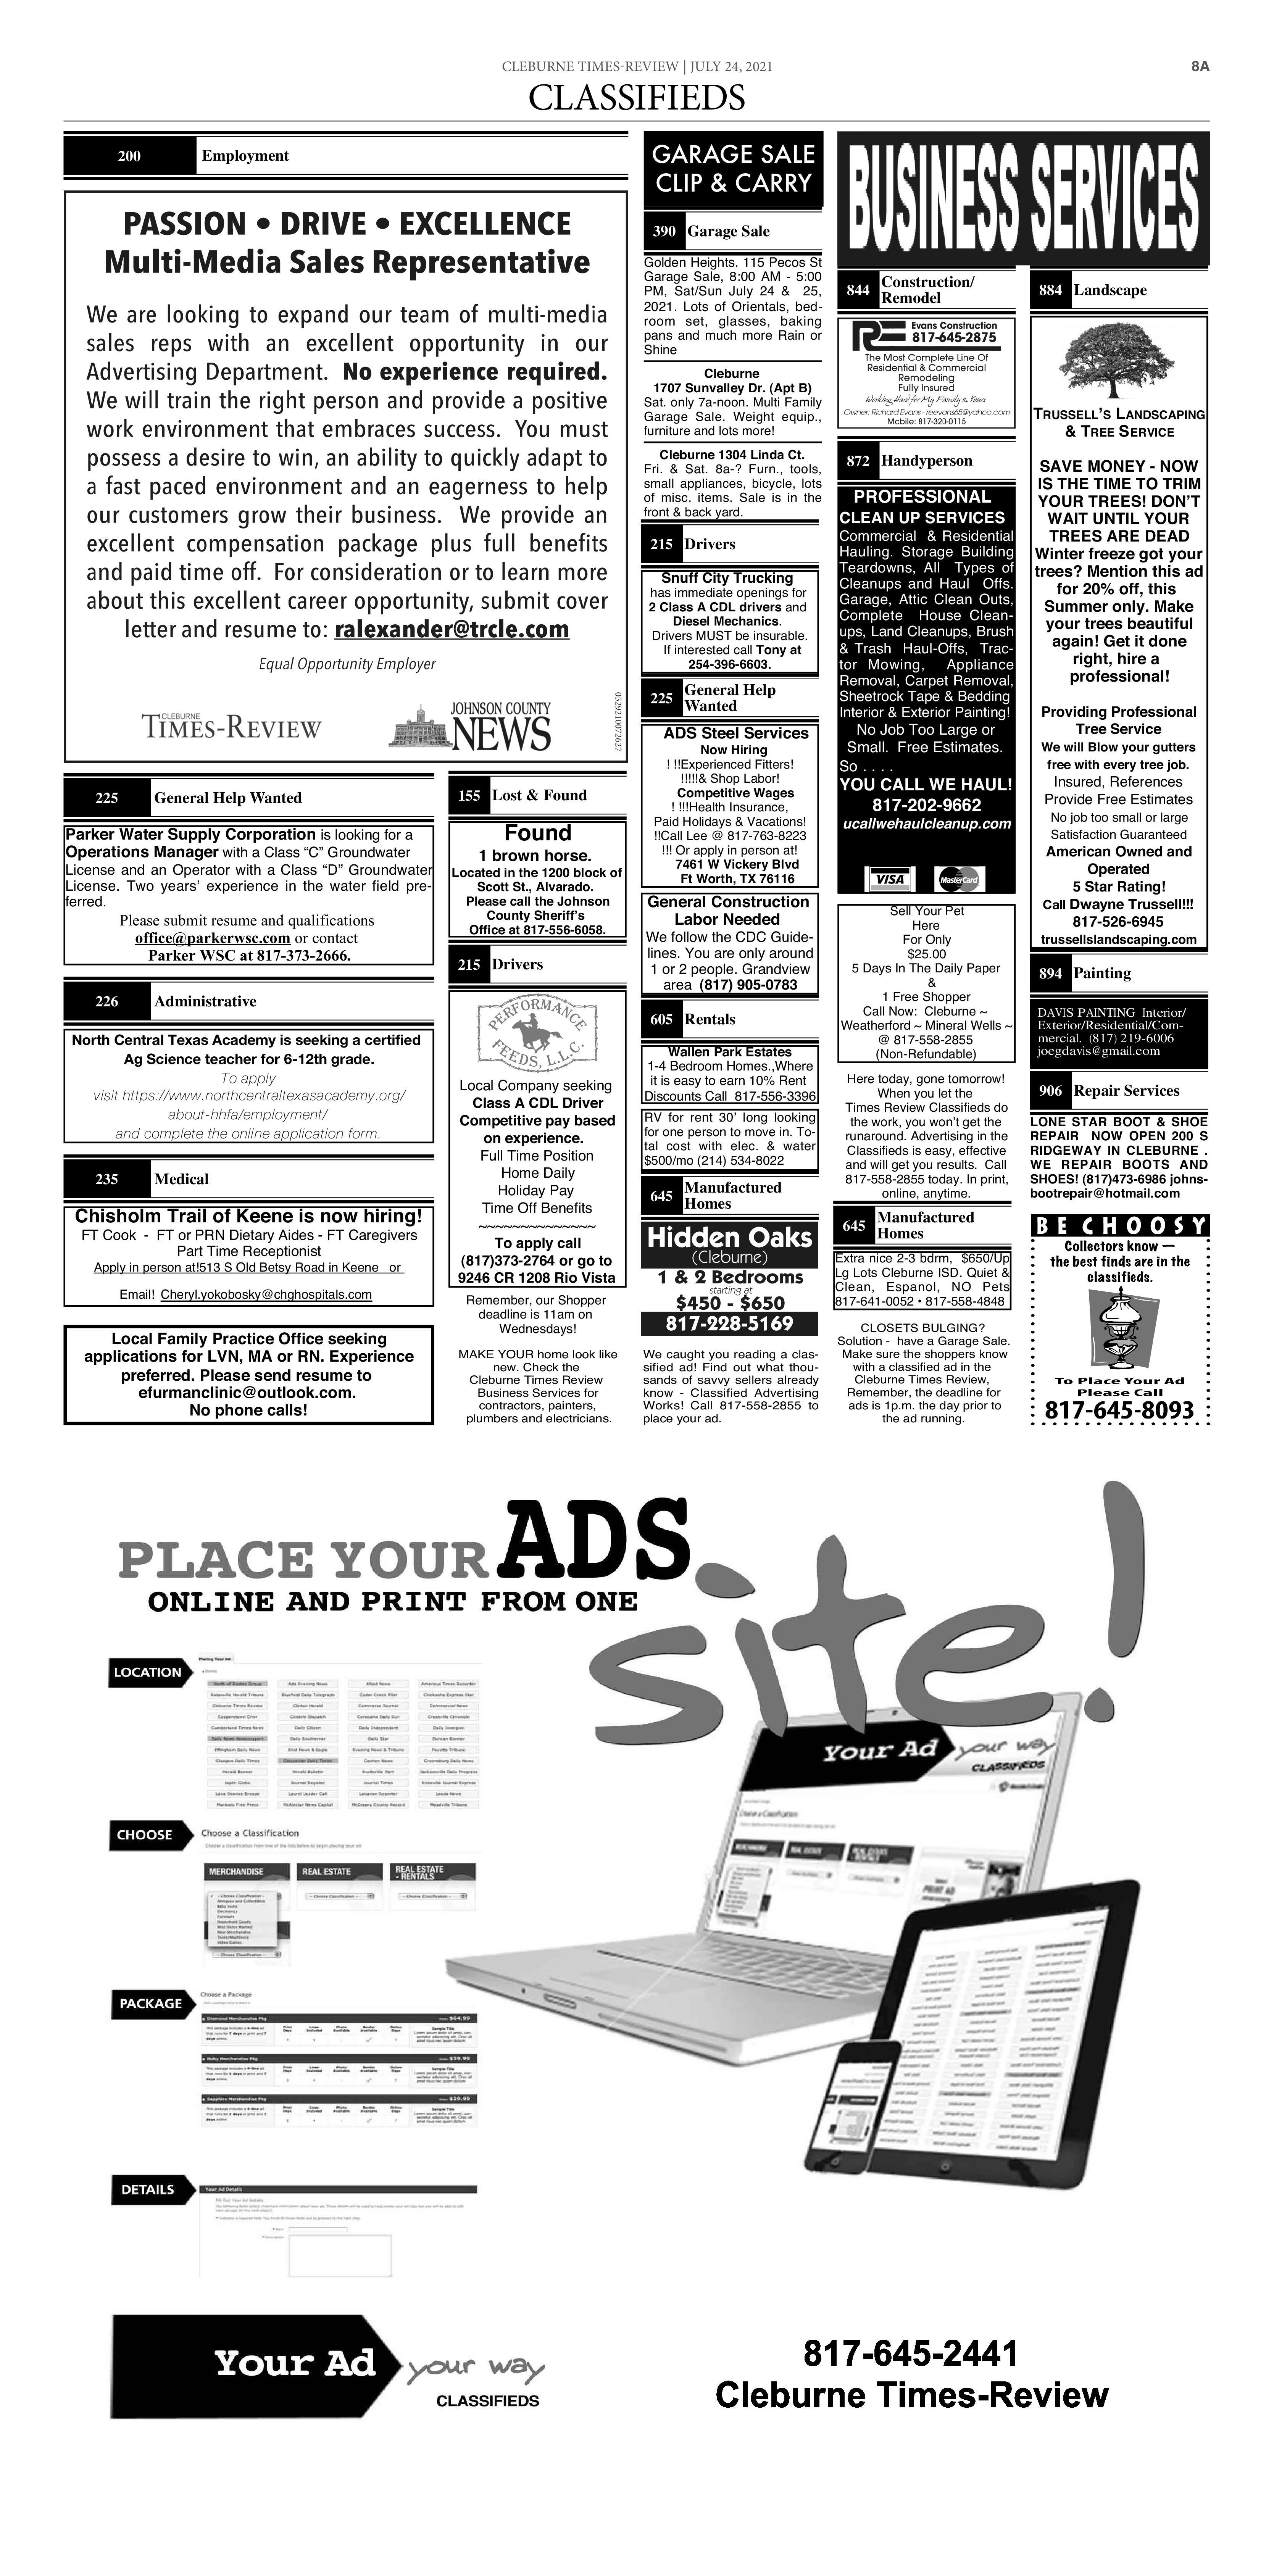 Cleburne Times Review Newspaper Ads Classifieds Employment Cleburne Times Review [ 6750 x 3338 Pixel ]